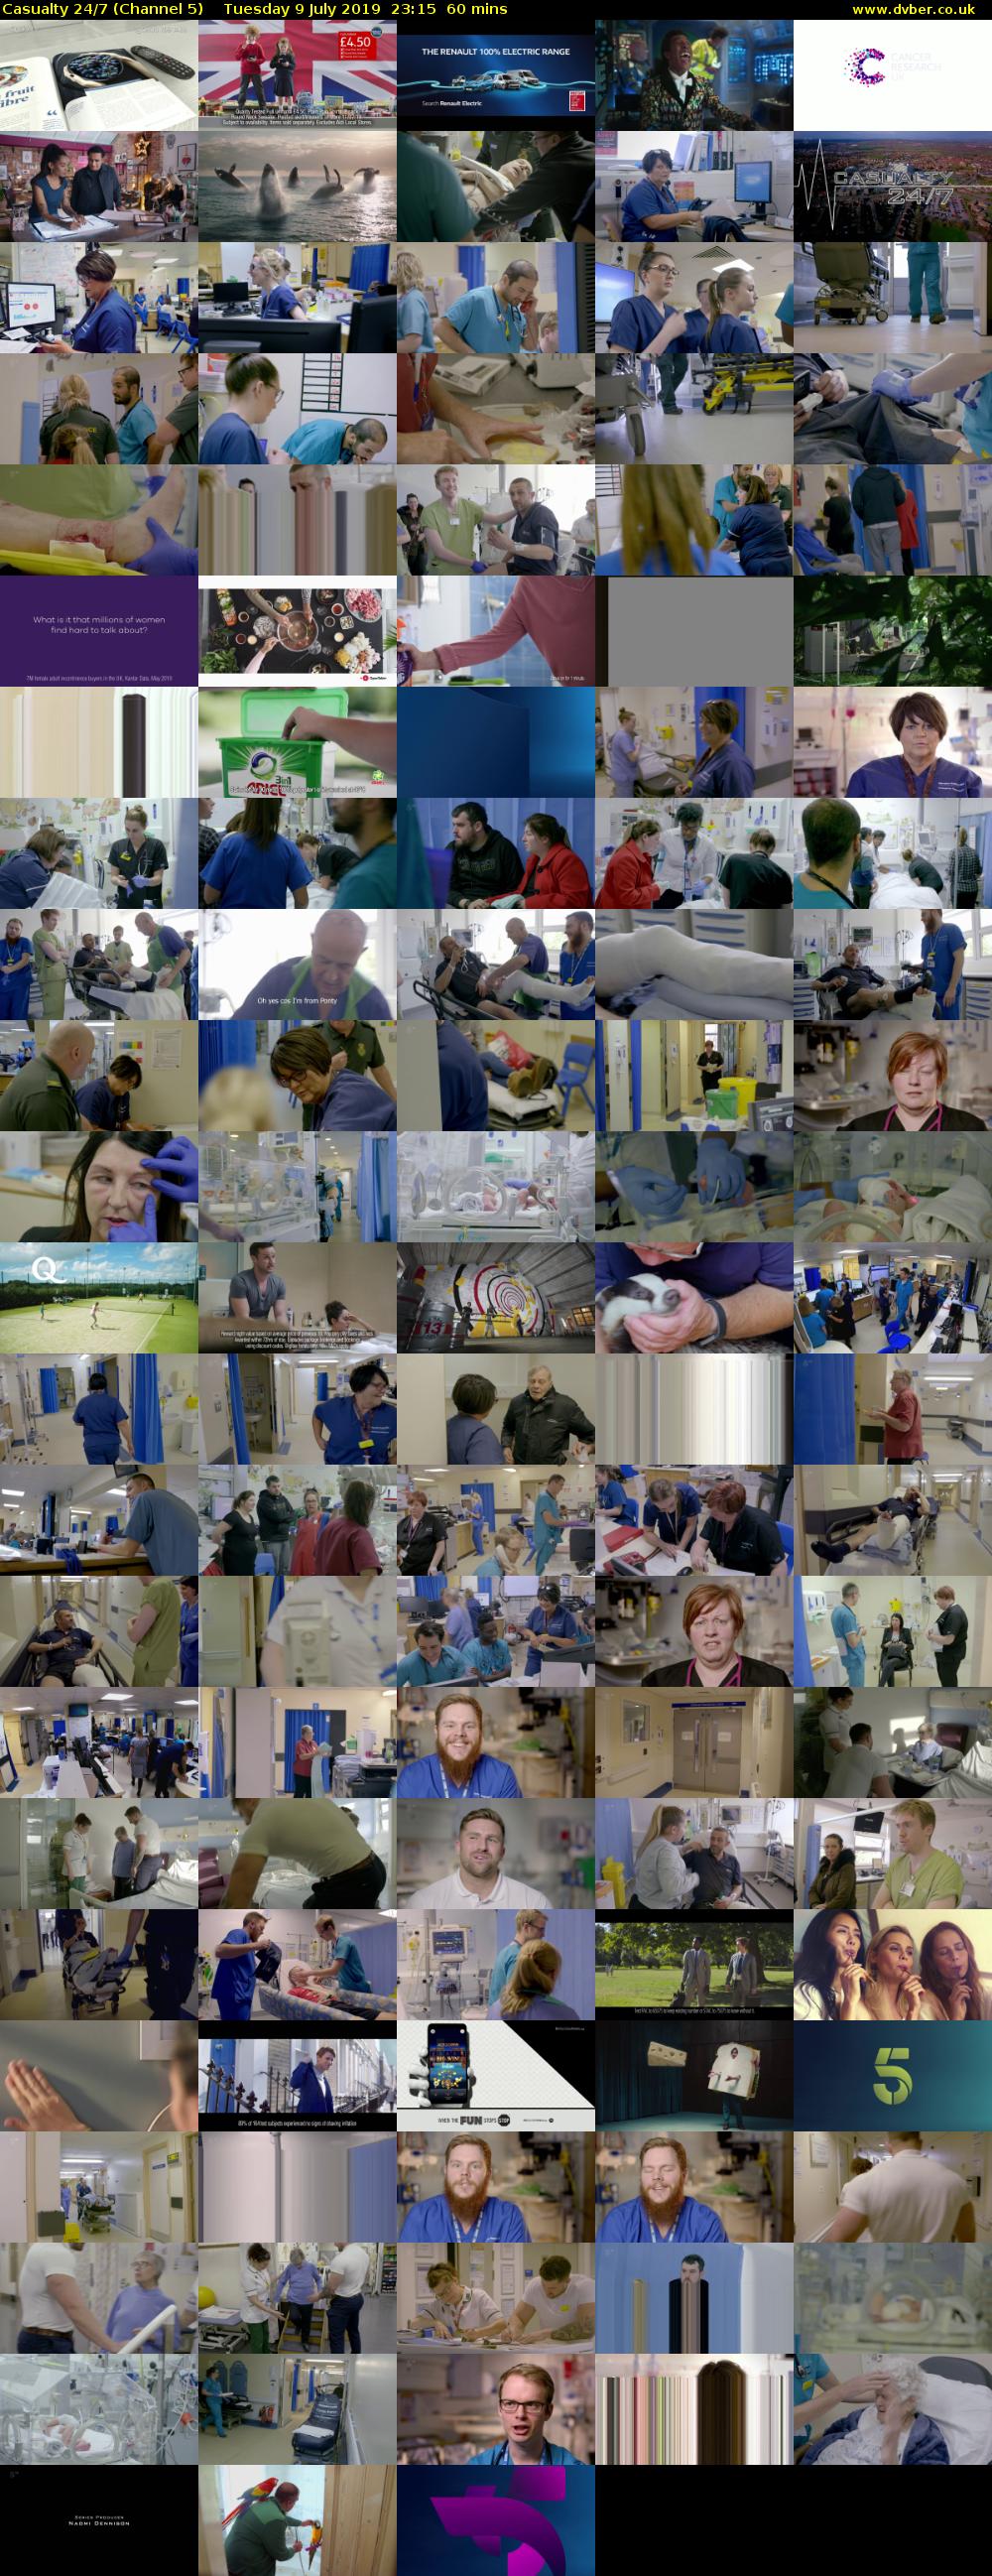 Casualty 24/7 (Channel 5) Tuesday 9 July 2019 23:15 - 00:15